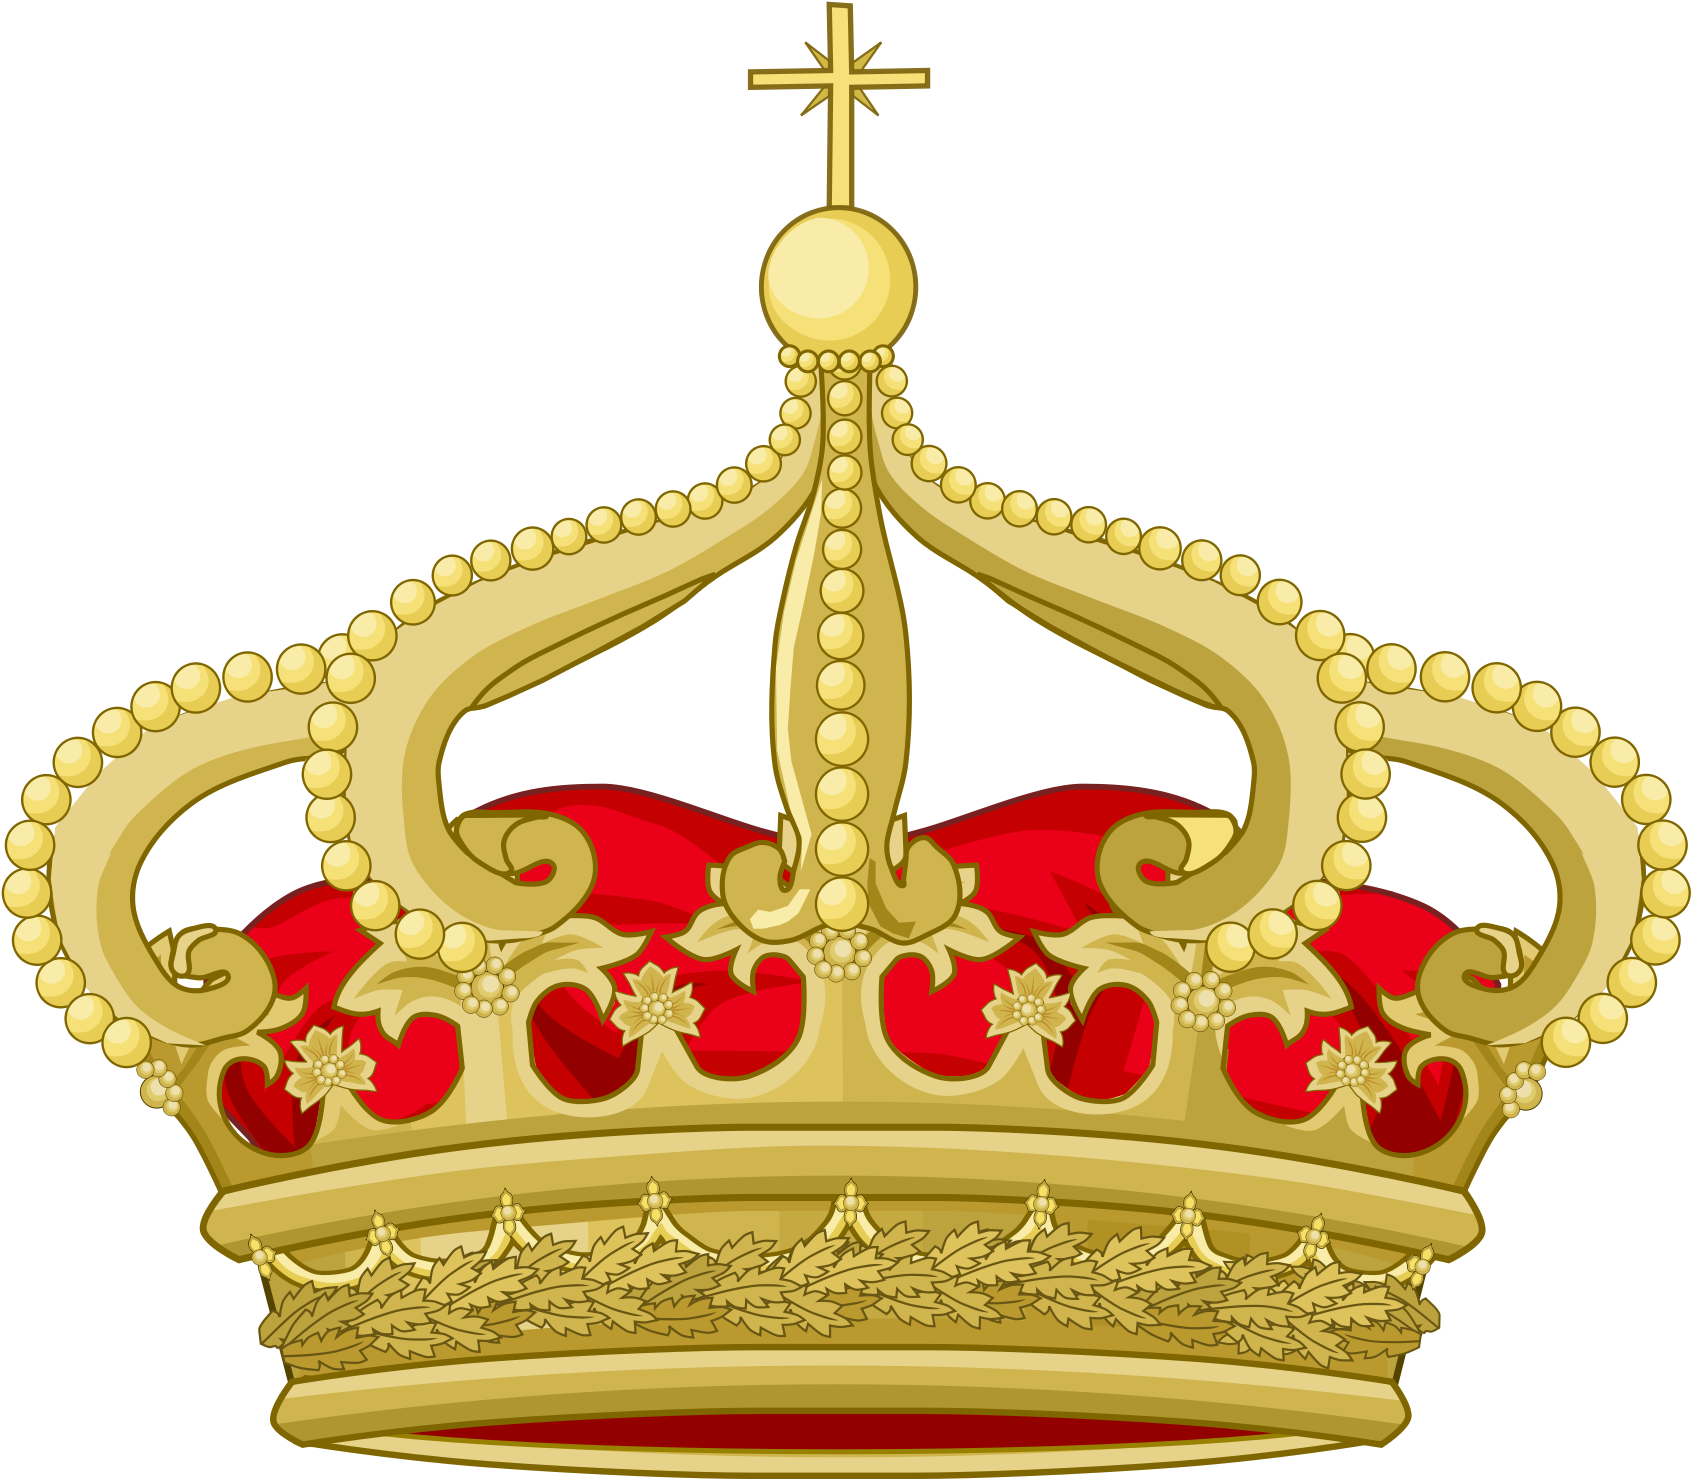 Royal Crown Picture 9, - Royal Crown Of Portugal (2000x1741)